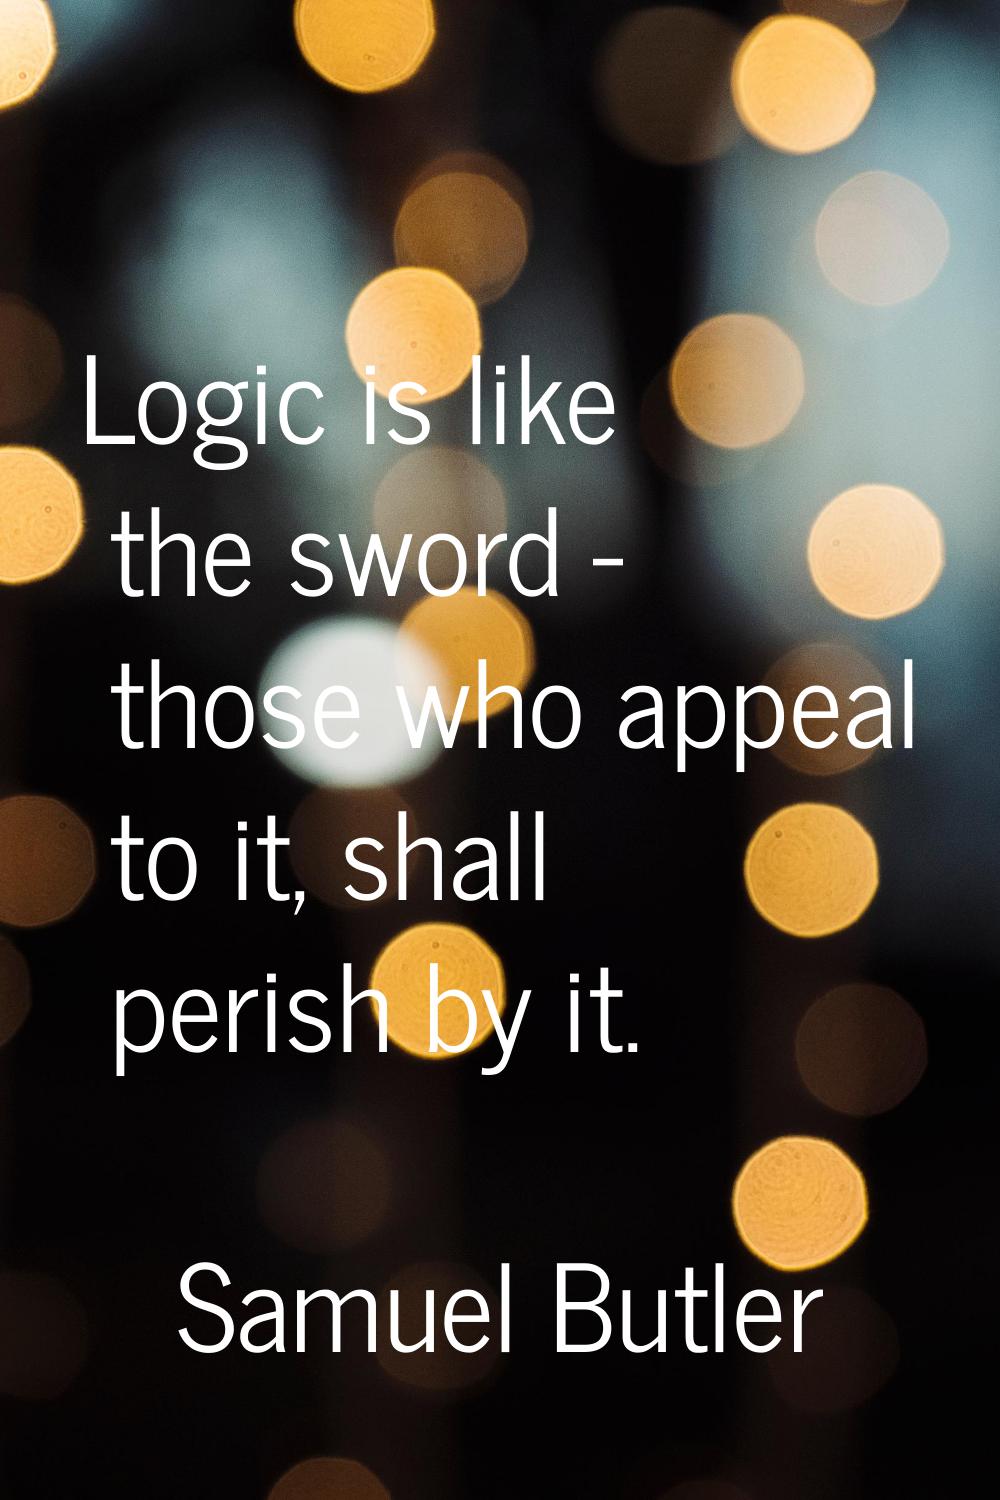 Logic is like the sword - those who appeal to it, shall perish by it.